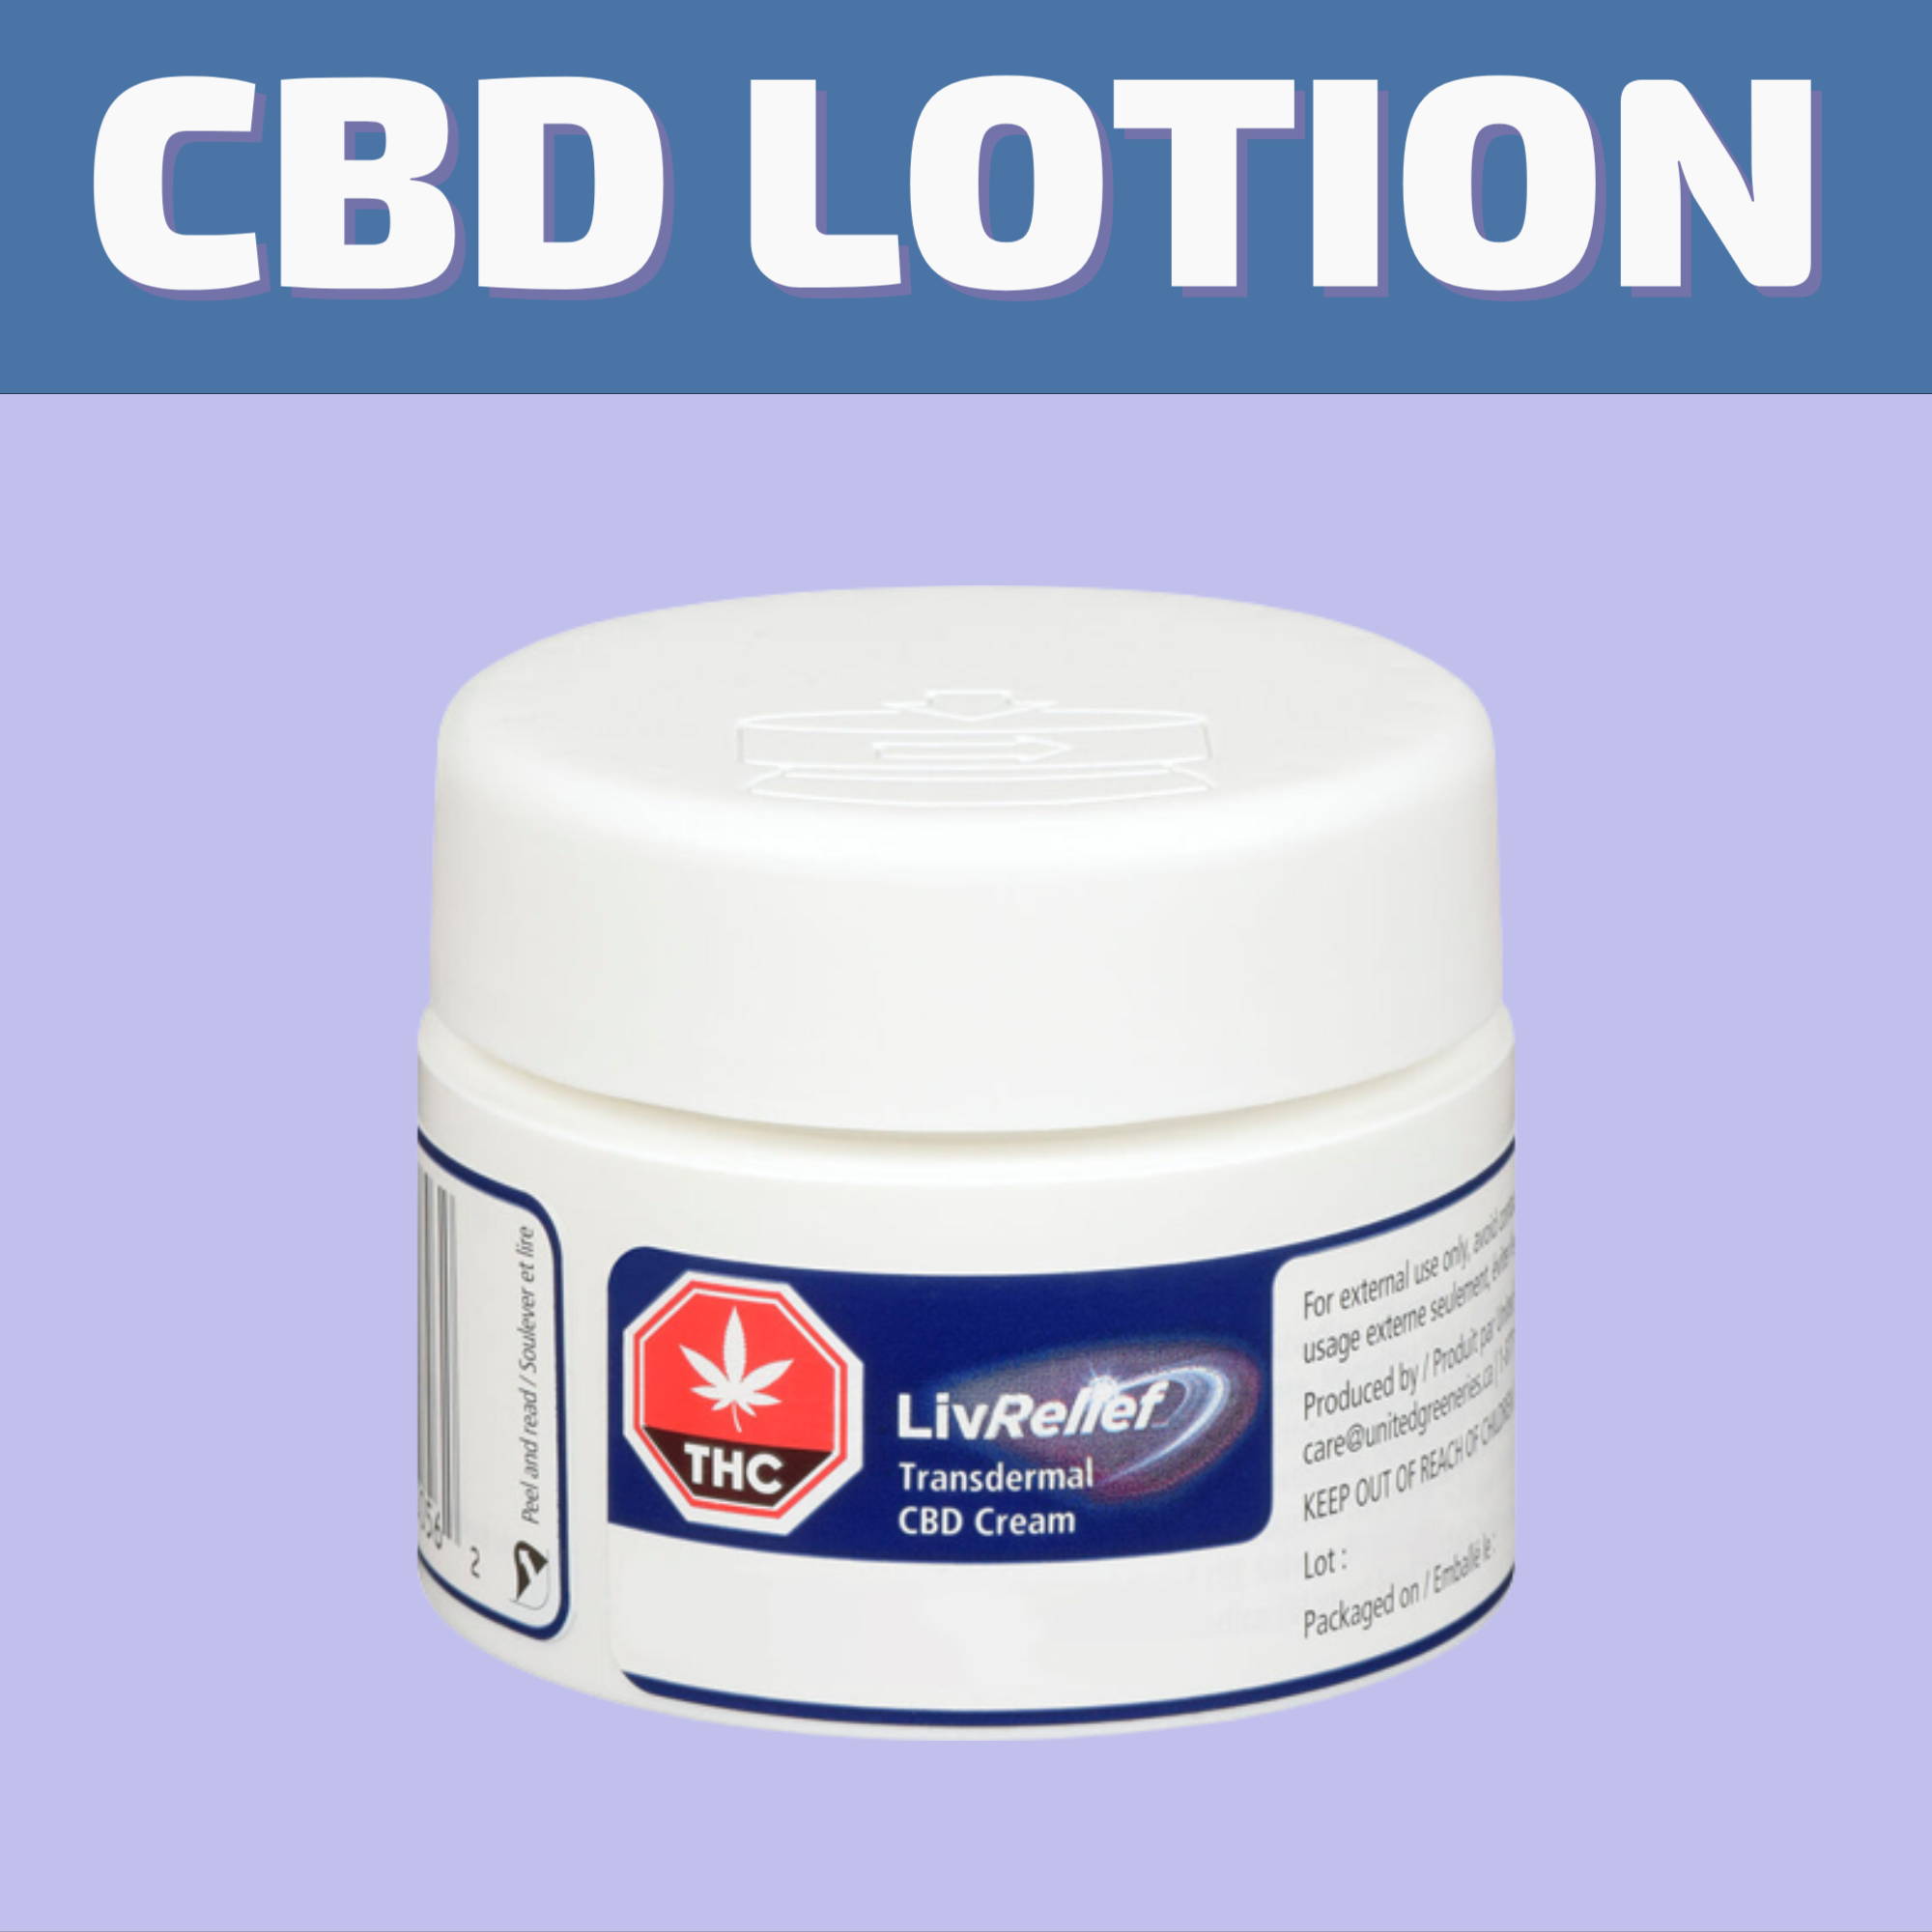 Shop the best selection of CBD Lotion and CBD Oil for same day delivery or pick it up at our dispensary on 580 Academy Road.  